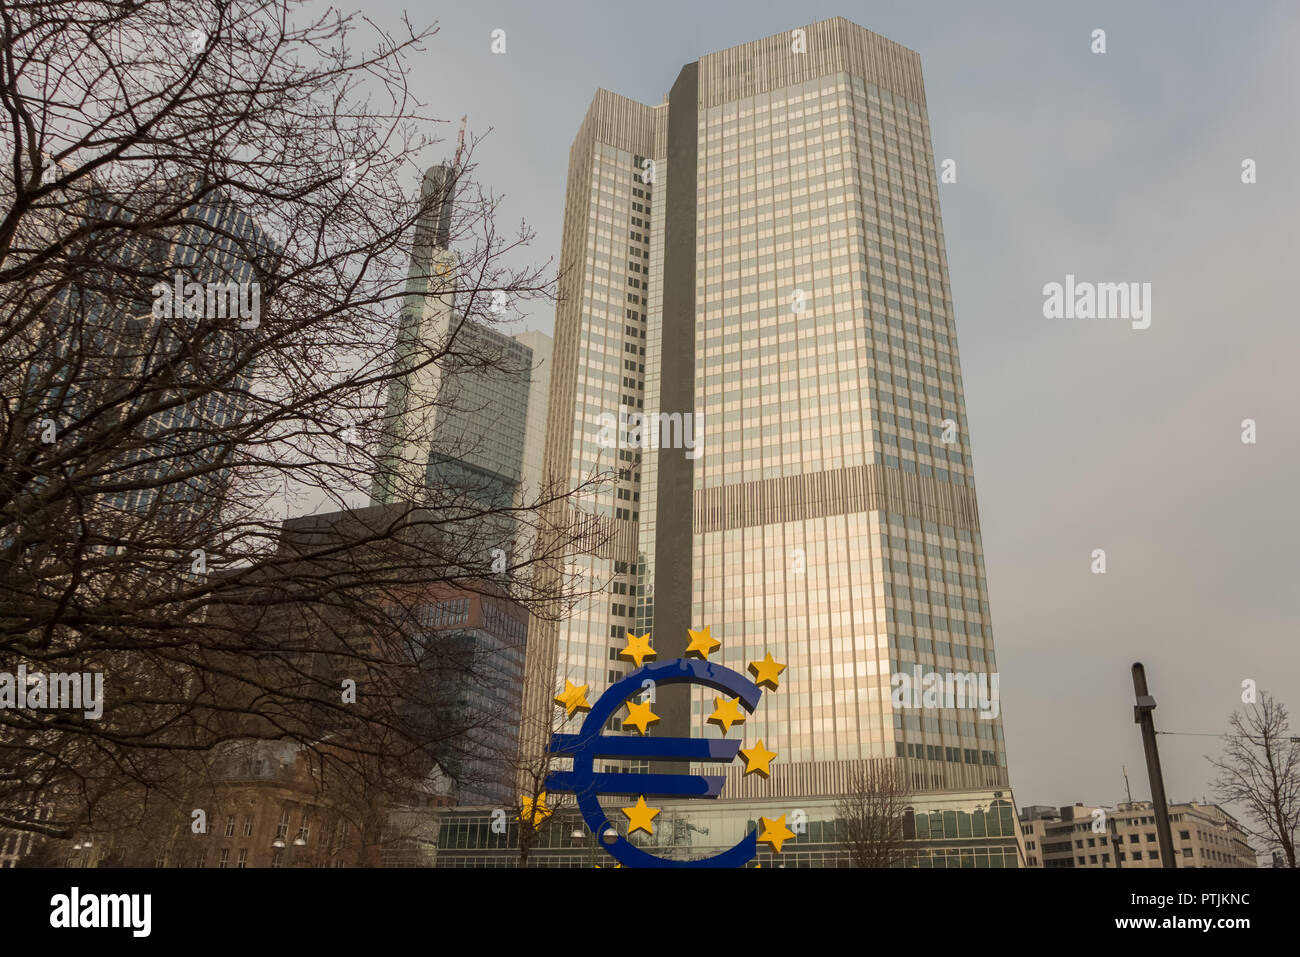 FRANKFURT(MAIN),GERMANY - MARCH 03,2018:Gallusanlage These are business buildings of banks and insurances.The skyscrapers are in the centre of the cit Stock Photo